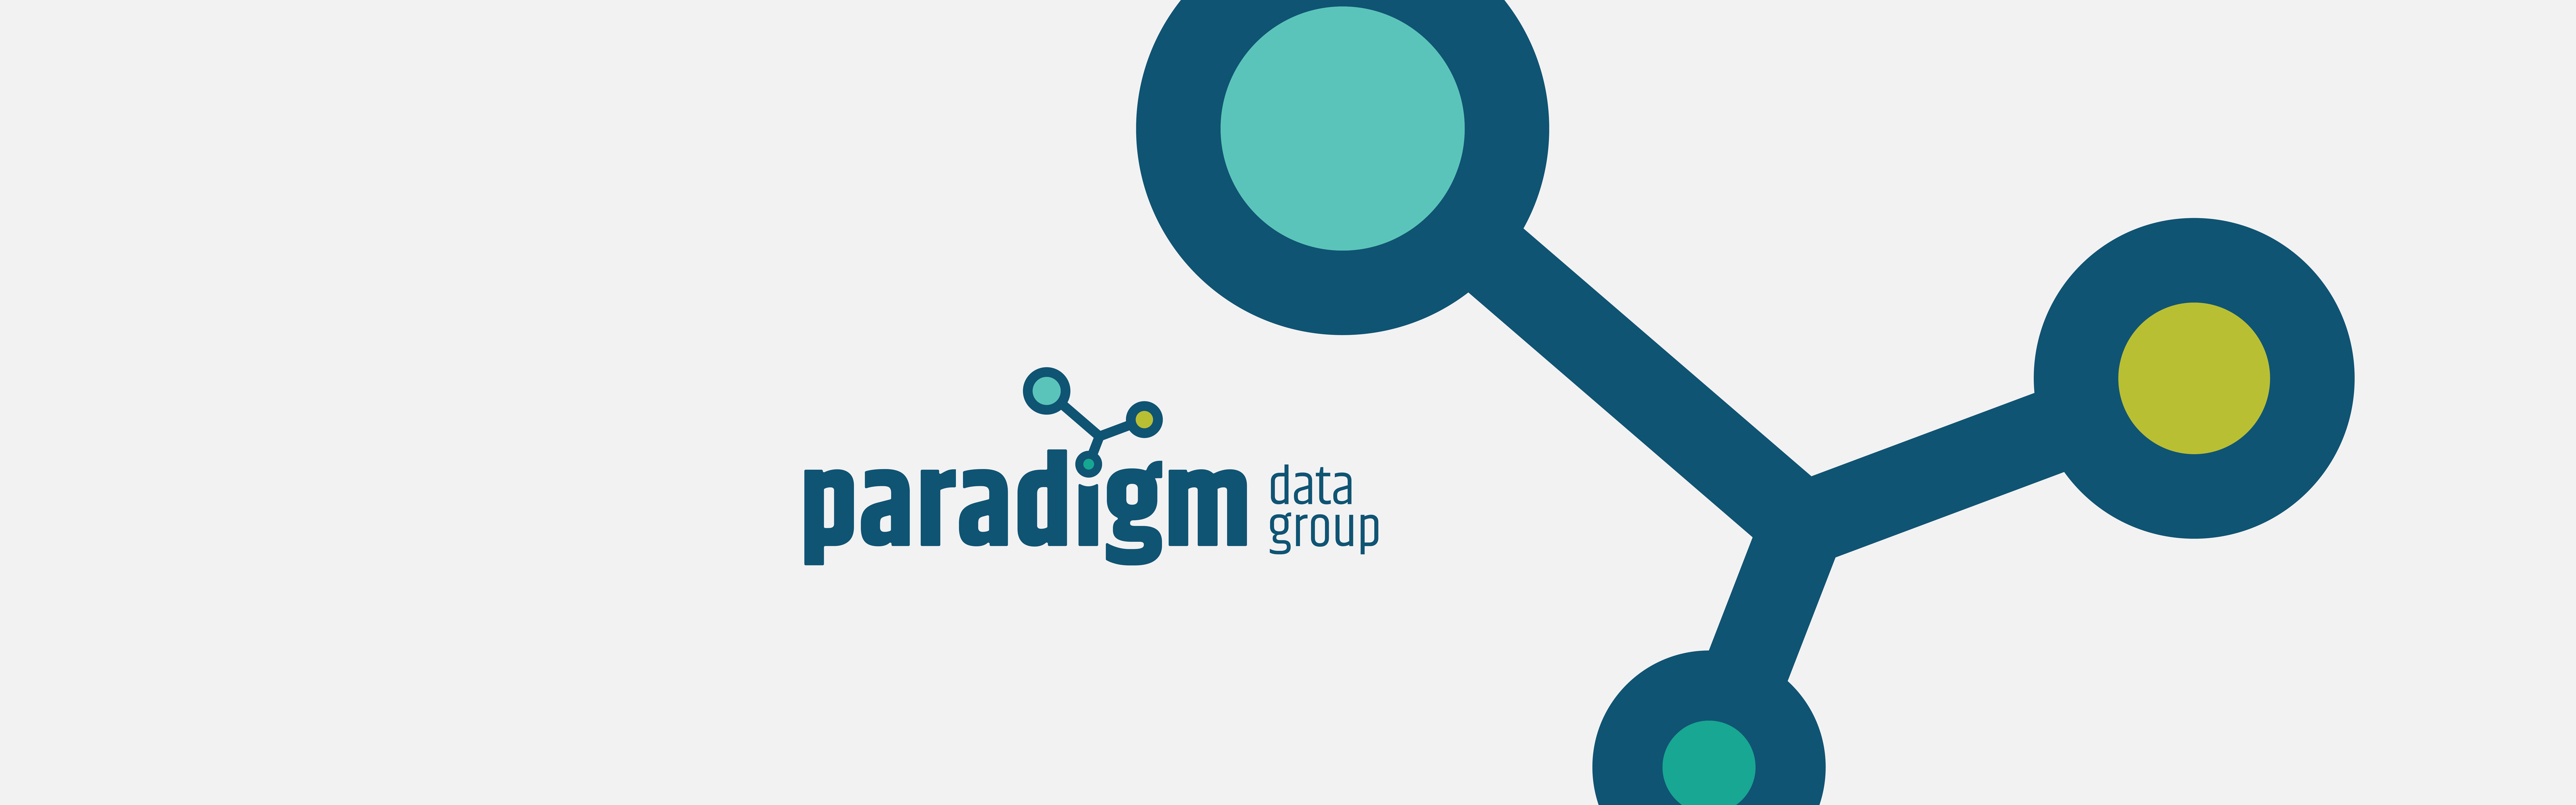 The image displays a graphical logo for "Paradigm Data Group," featuring a stylized molecule or network icon with interconnected circles in shades of blue and green, and one circle highlighted in yellow.